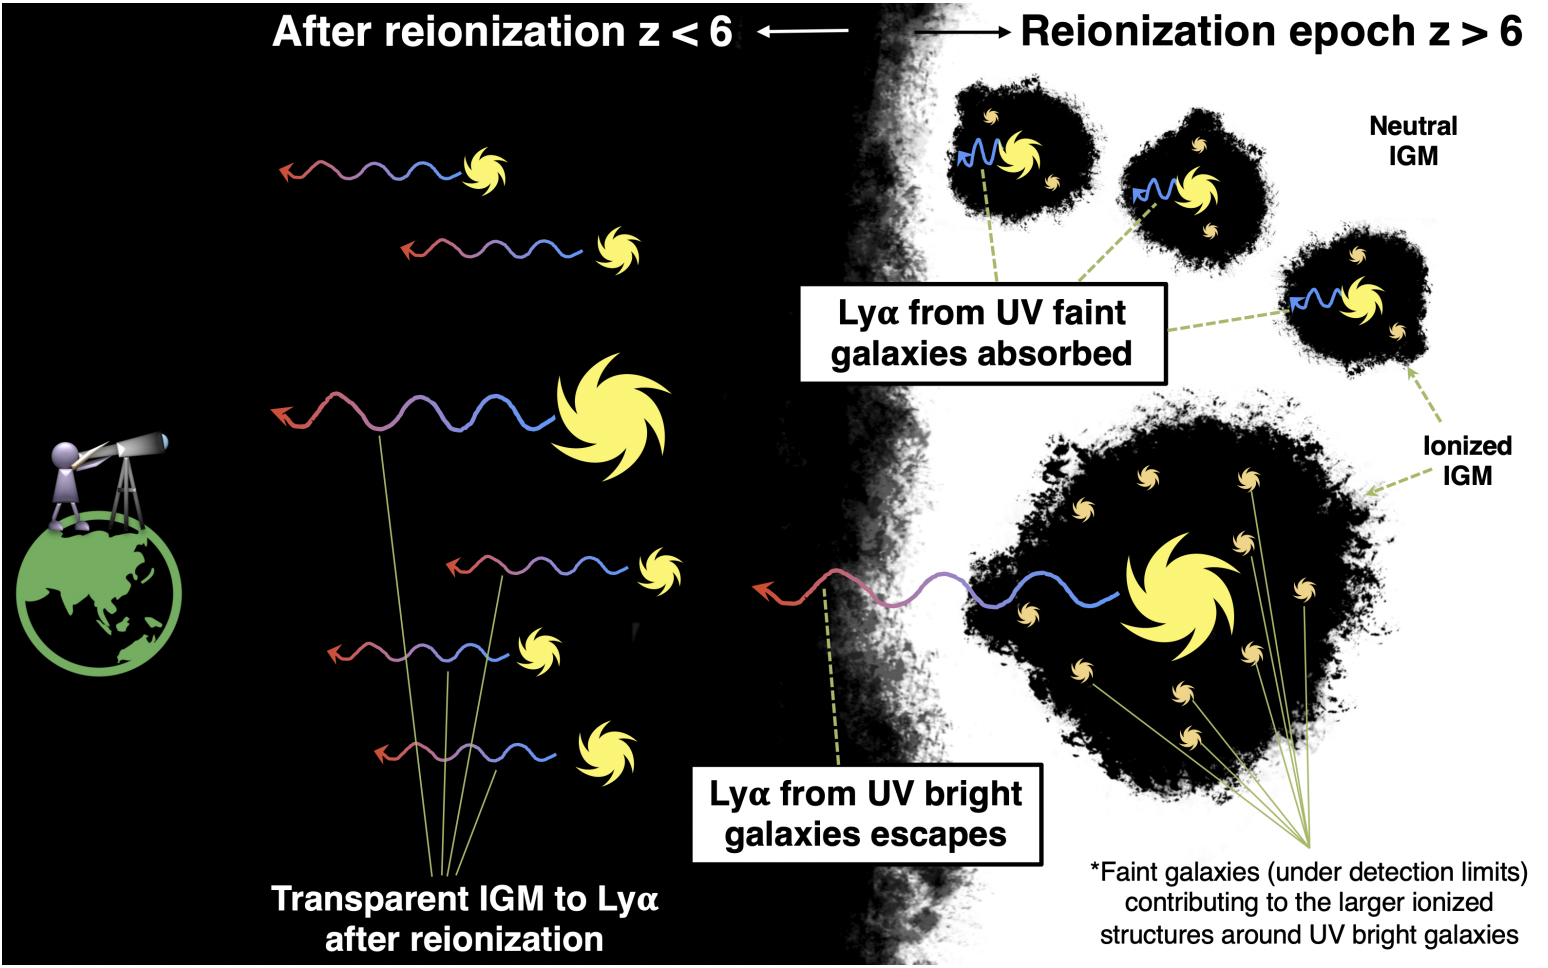 Cartoon depiction of inhomogeneous processes in reionization. On the right is earlier times with more neutral gas. Fainter galaxies have smaller bubbles of ionized gas around them and less clustering of galaxies than the brighter galaxies. Lyman alpha photons can escape the bigger bubbles. On the left is the observer looking through the mostly ionized nearby (later times) Universe.